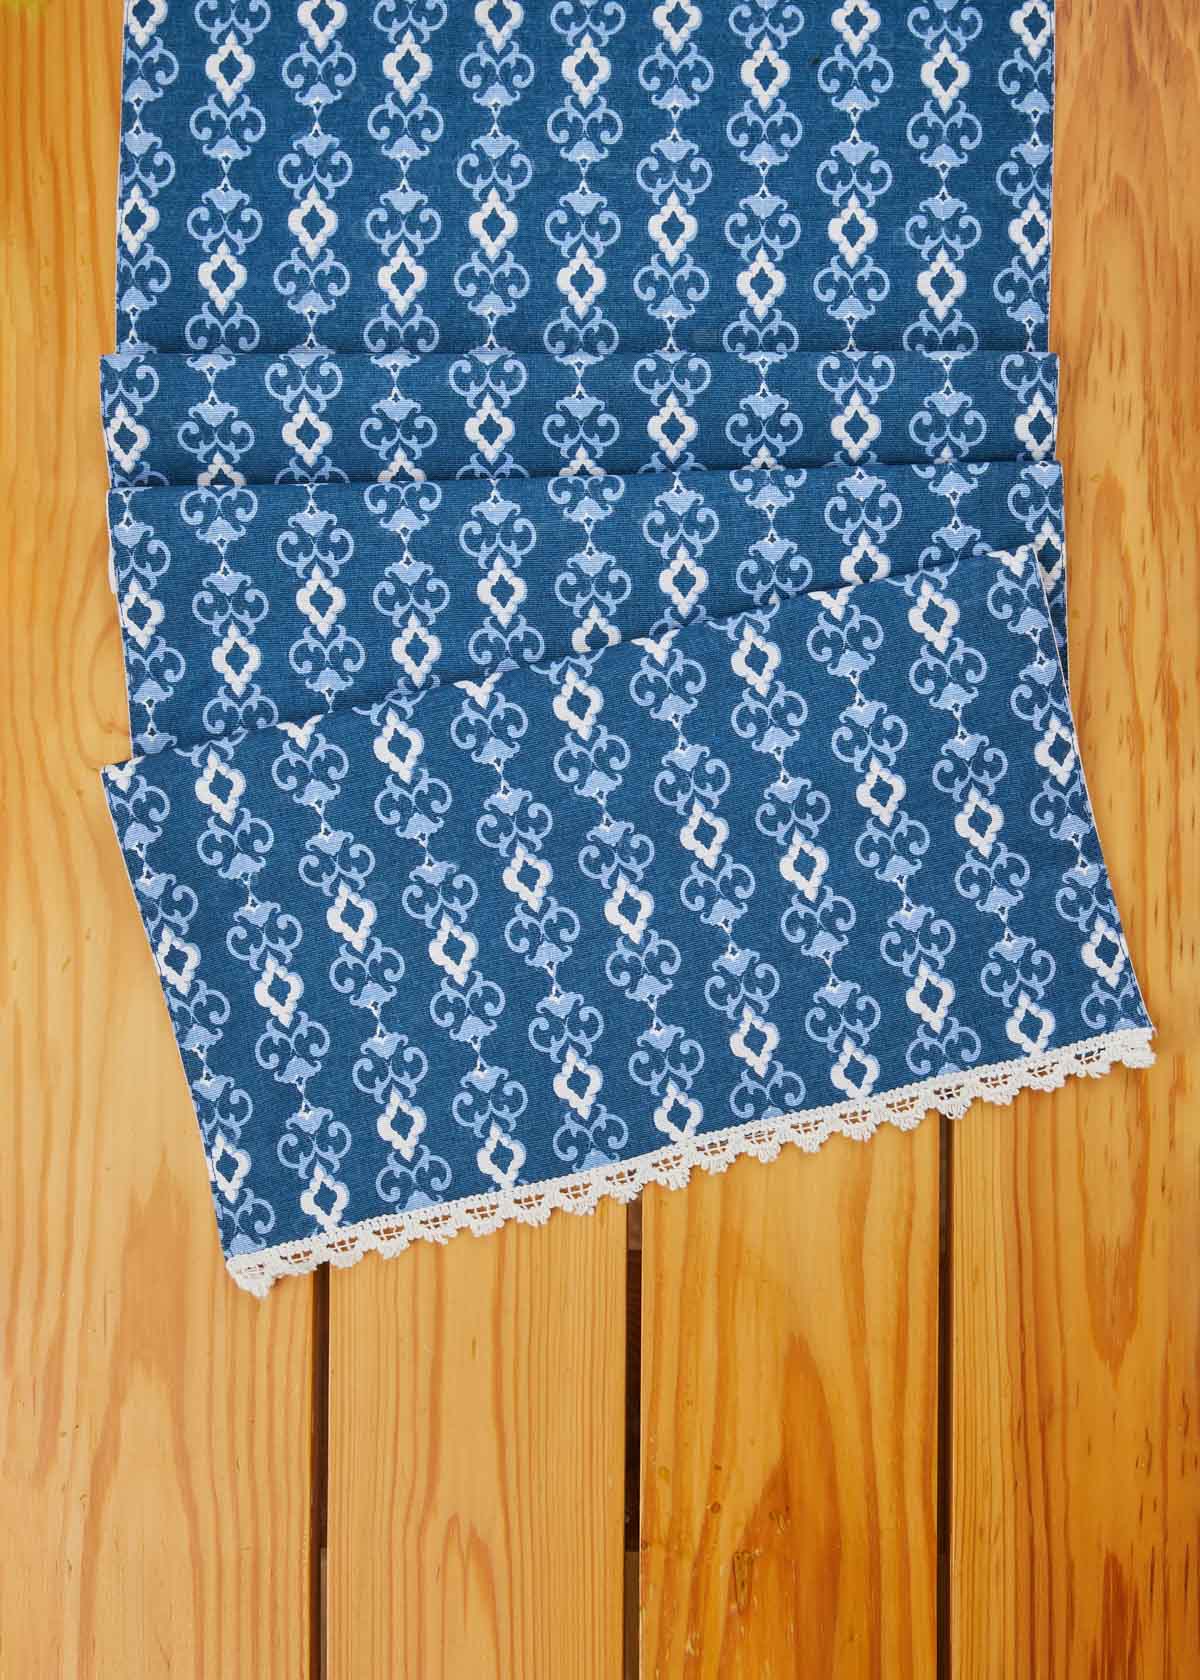 Azure 100% cotton elegant table runner for 4 seater or 6 seater Dining with tassels - Night blue